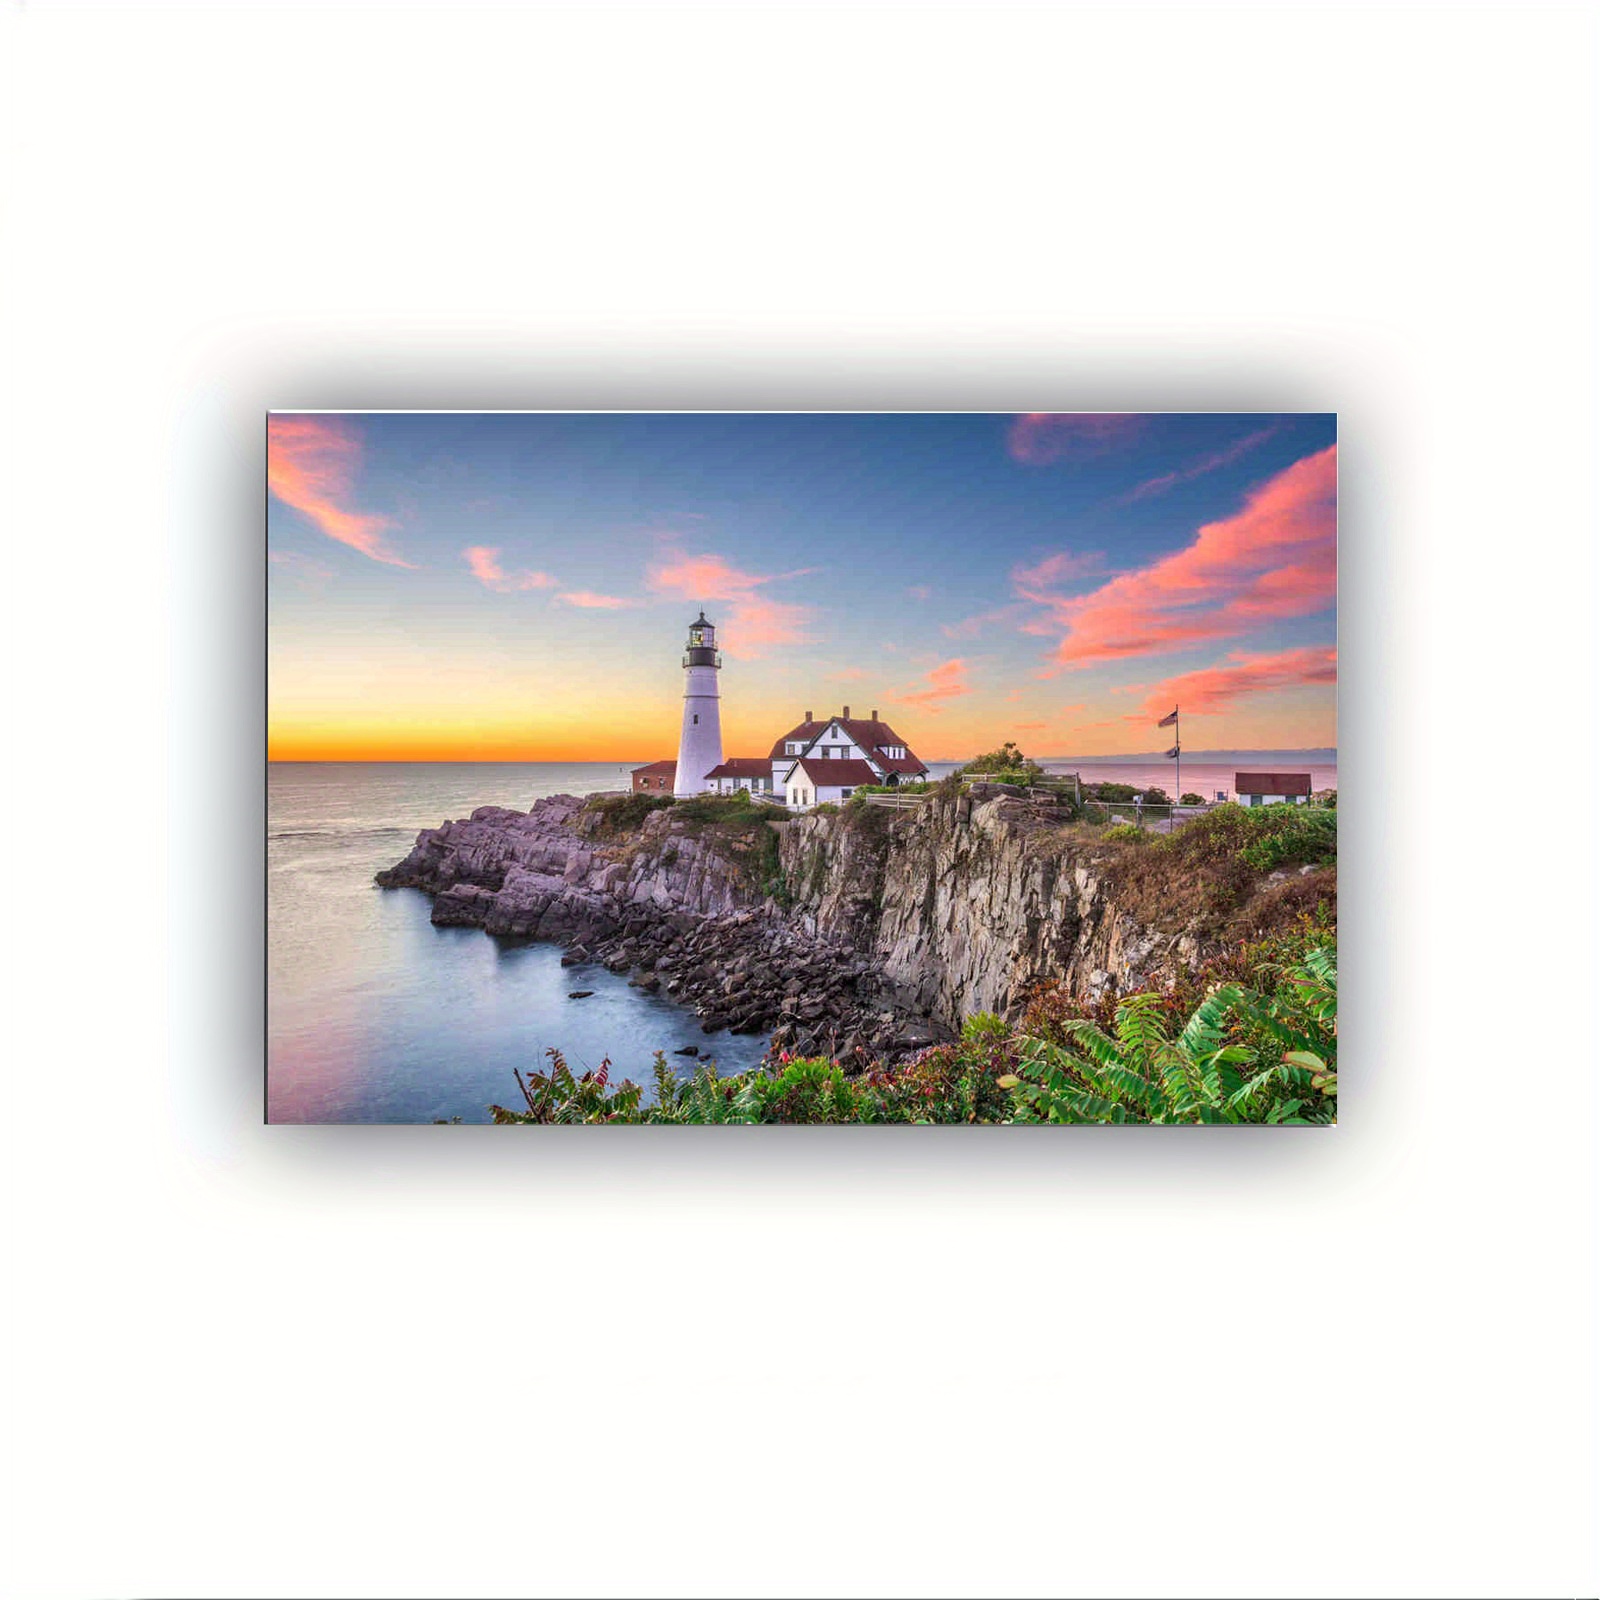 

1 Pc Wooden Framed Wall Art, Portland Lighthouse Poster, Artwork Wall Painting For Gift, Home Living Room Office Cafe Wall Decor, Perfect Gift And Home Decoration